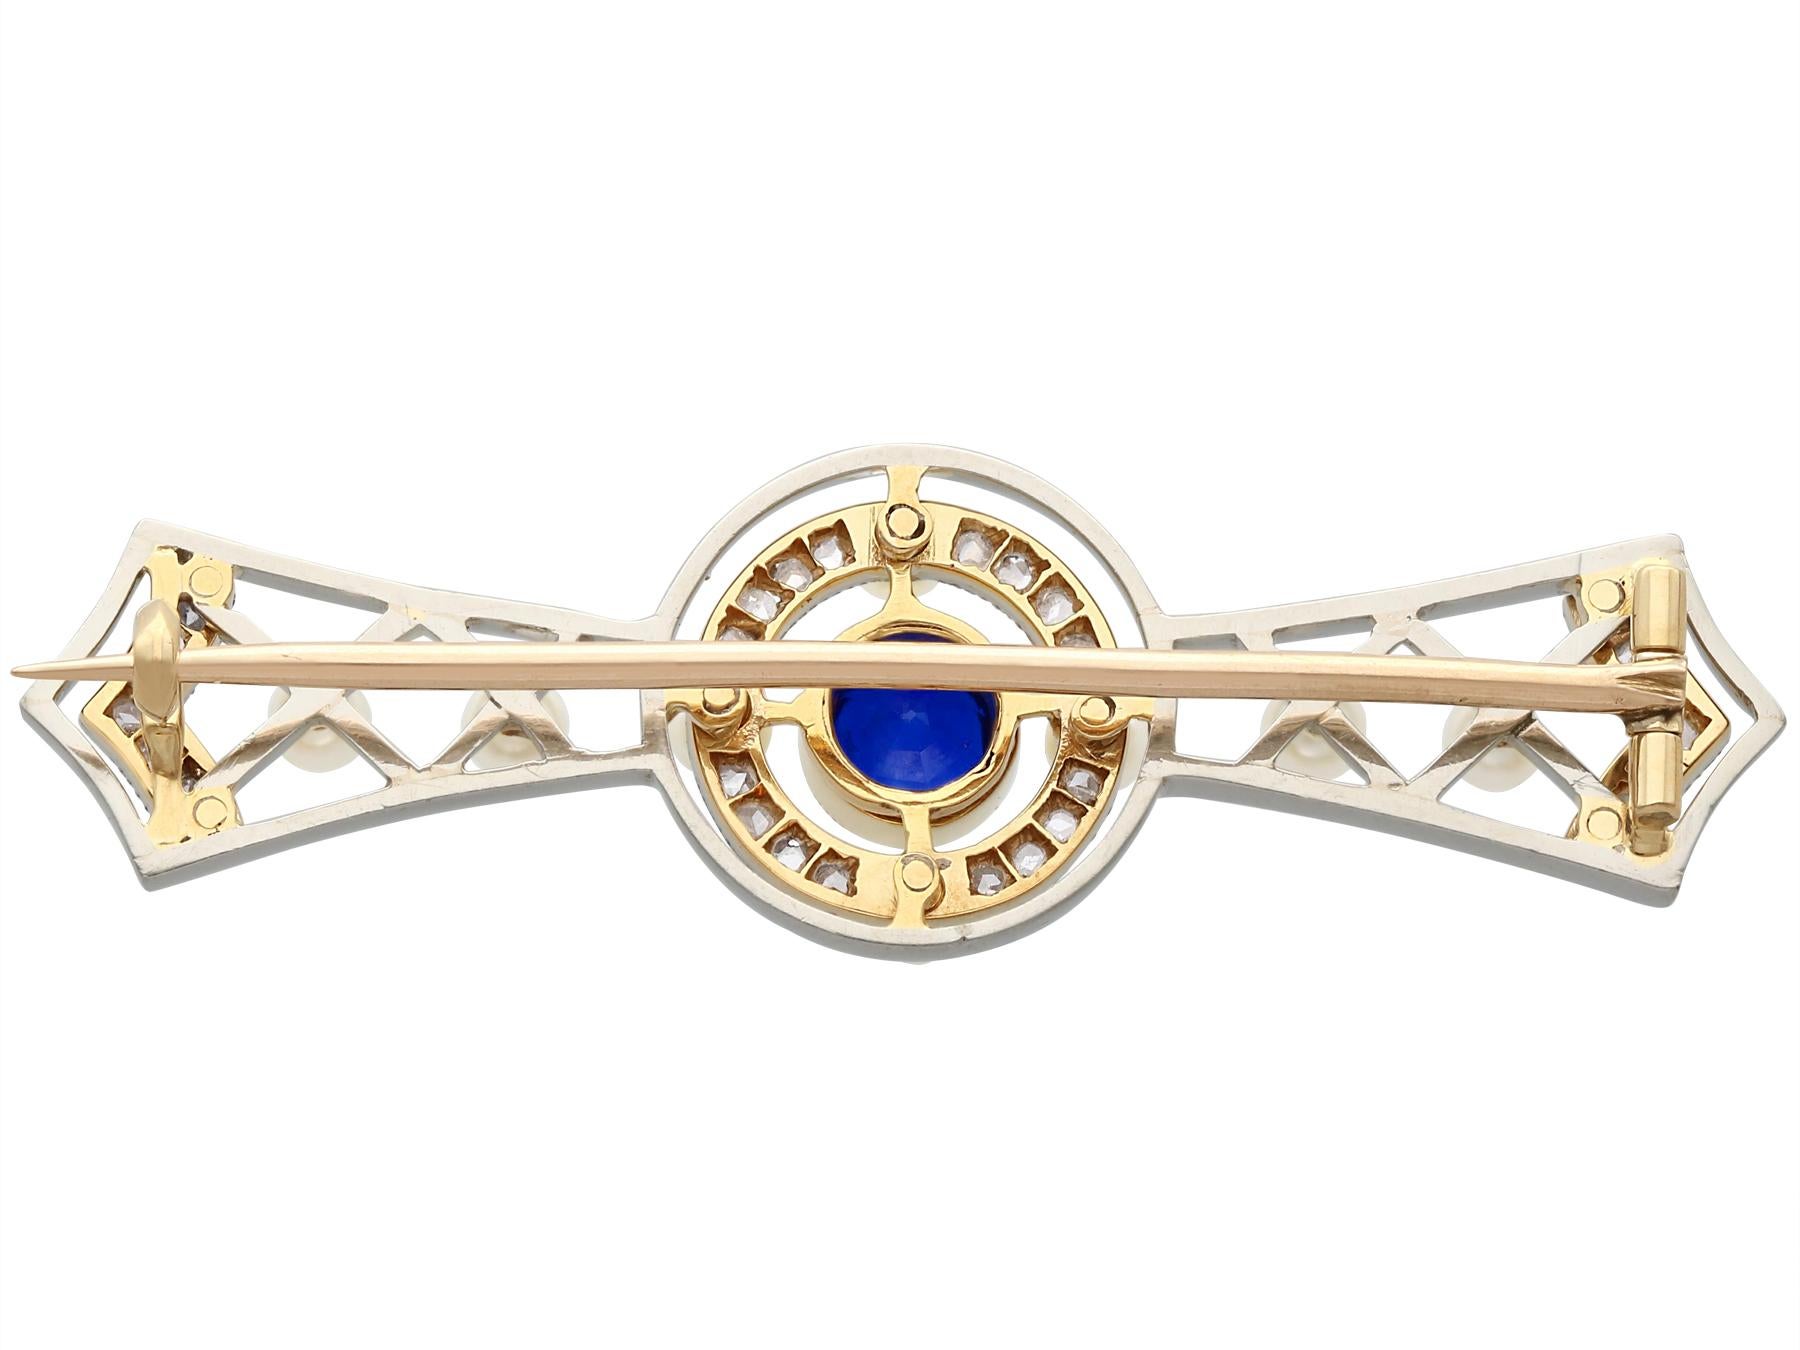 Antique Sapphire Diamond and Seed Pearl Yellow Gold and Platinum Brooch In Excellent Condition For Sale In Jesmond, Newcastle Upon Tyne